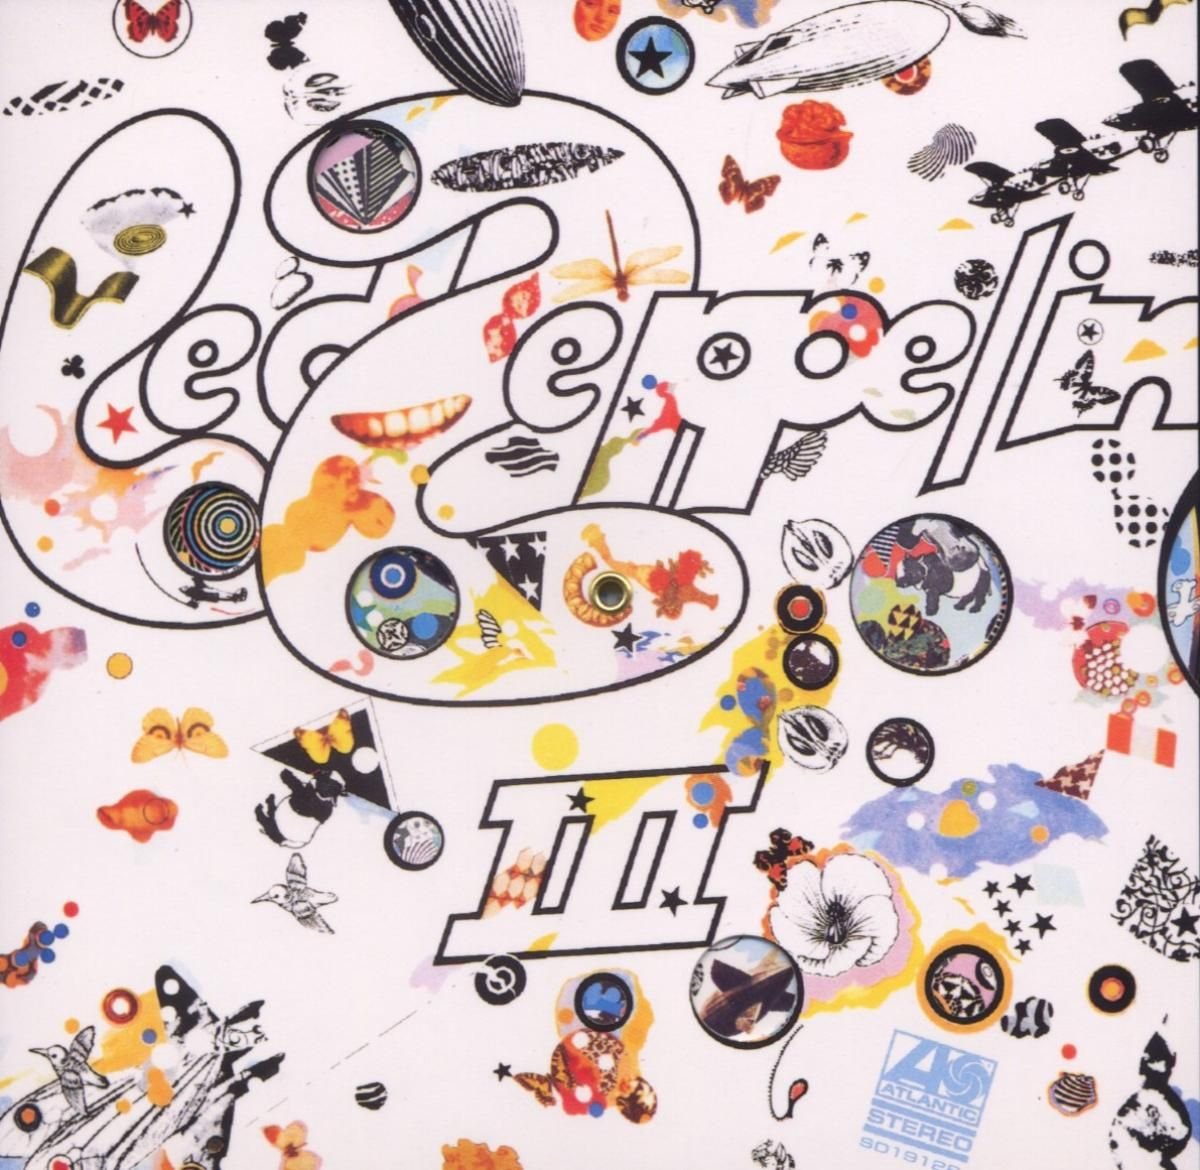 LED ZEPPELIN III (REMASTERED 2-CD DELUXE EDITION) on MovieShack